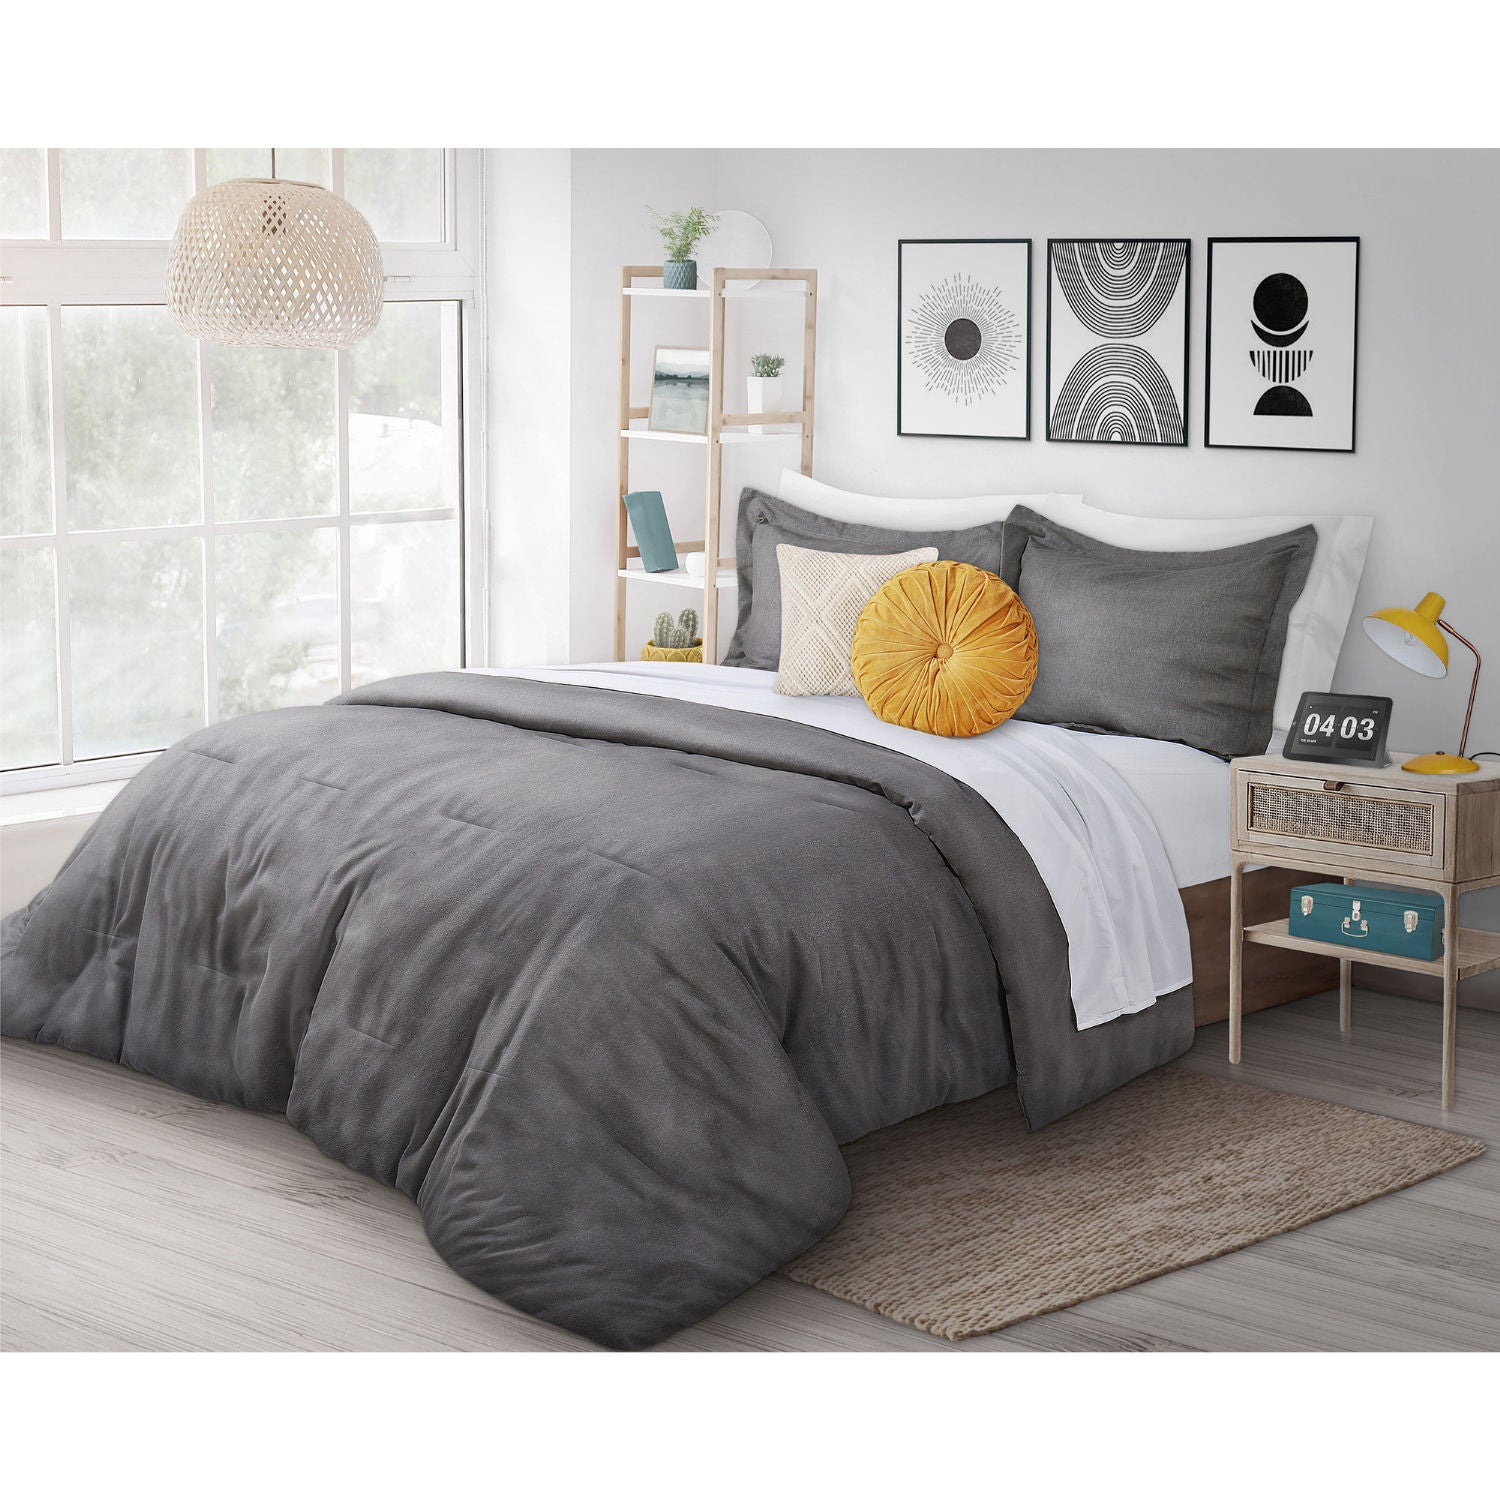 Woven Heathered Flannel Comforter 2 Pc Set- King. Grey